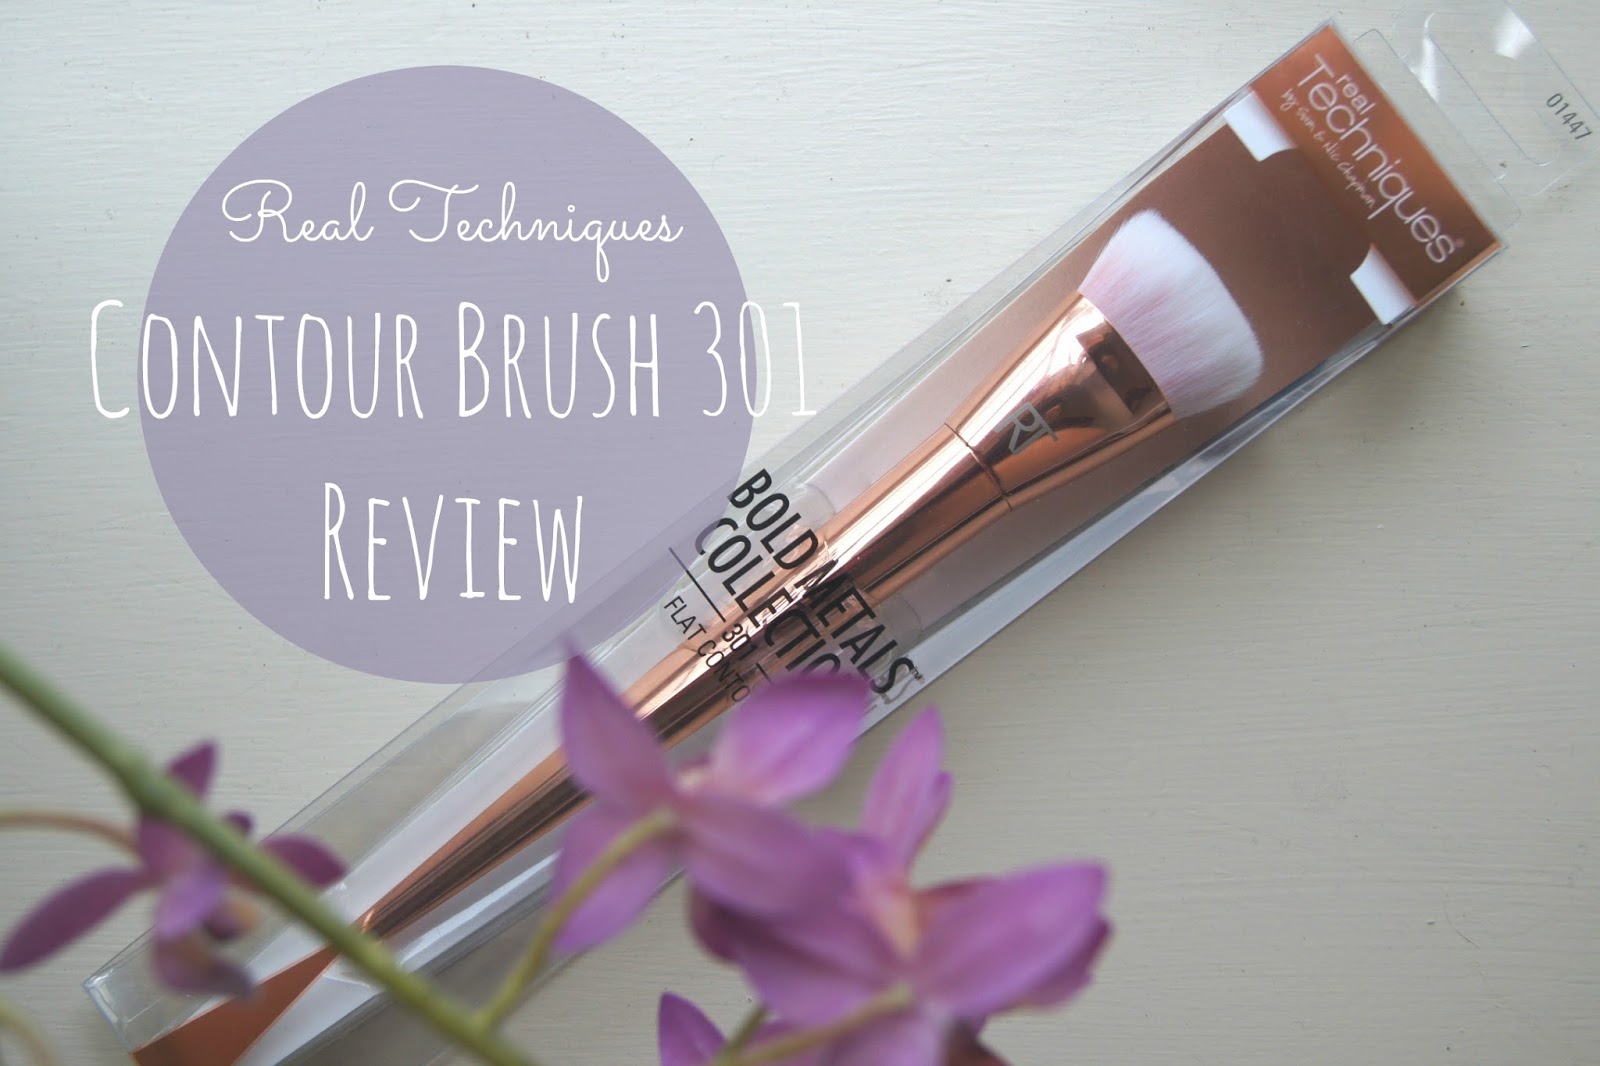 Real Techniques Contour Brush Review  Barely There Beauty - A Lifestyle  Blog from the Home Counties